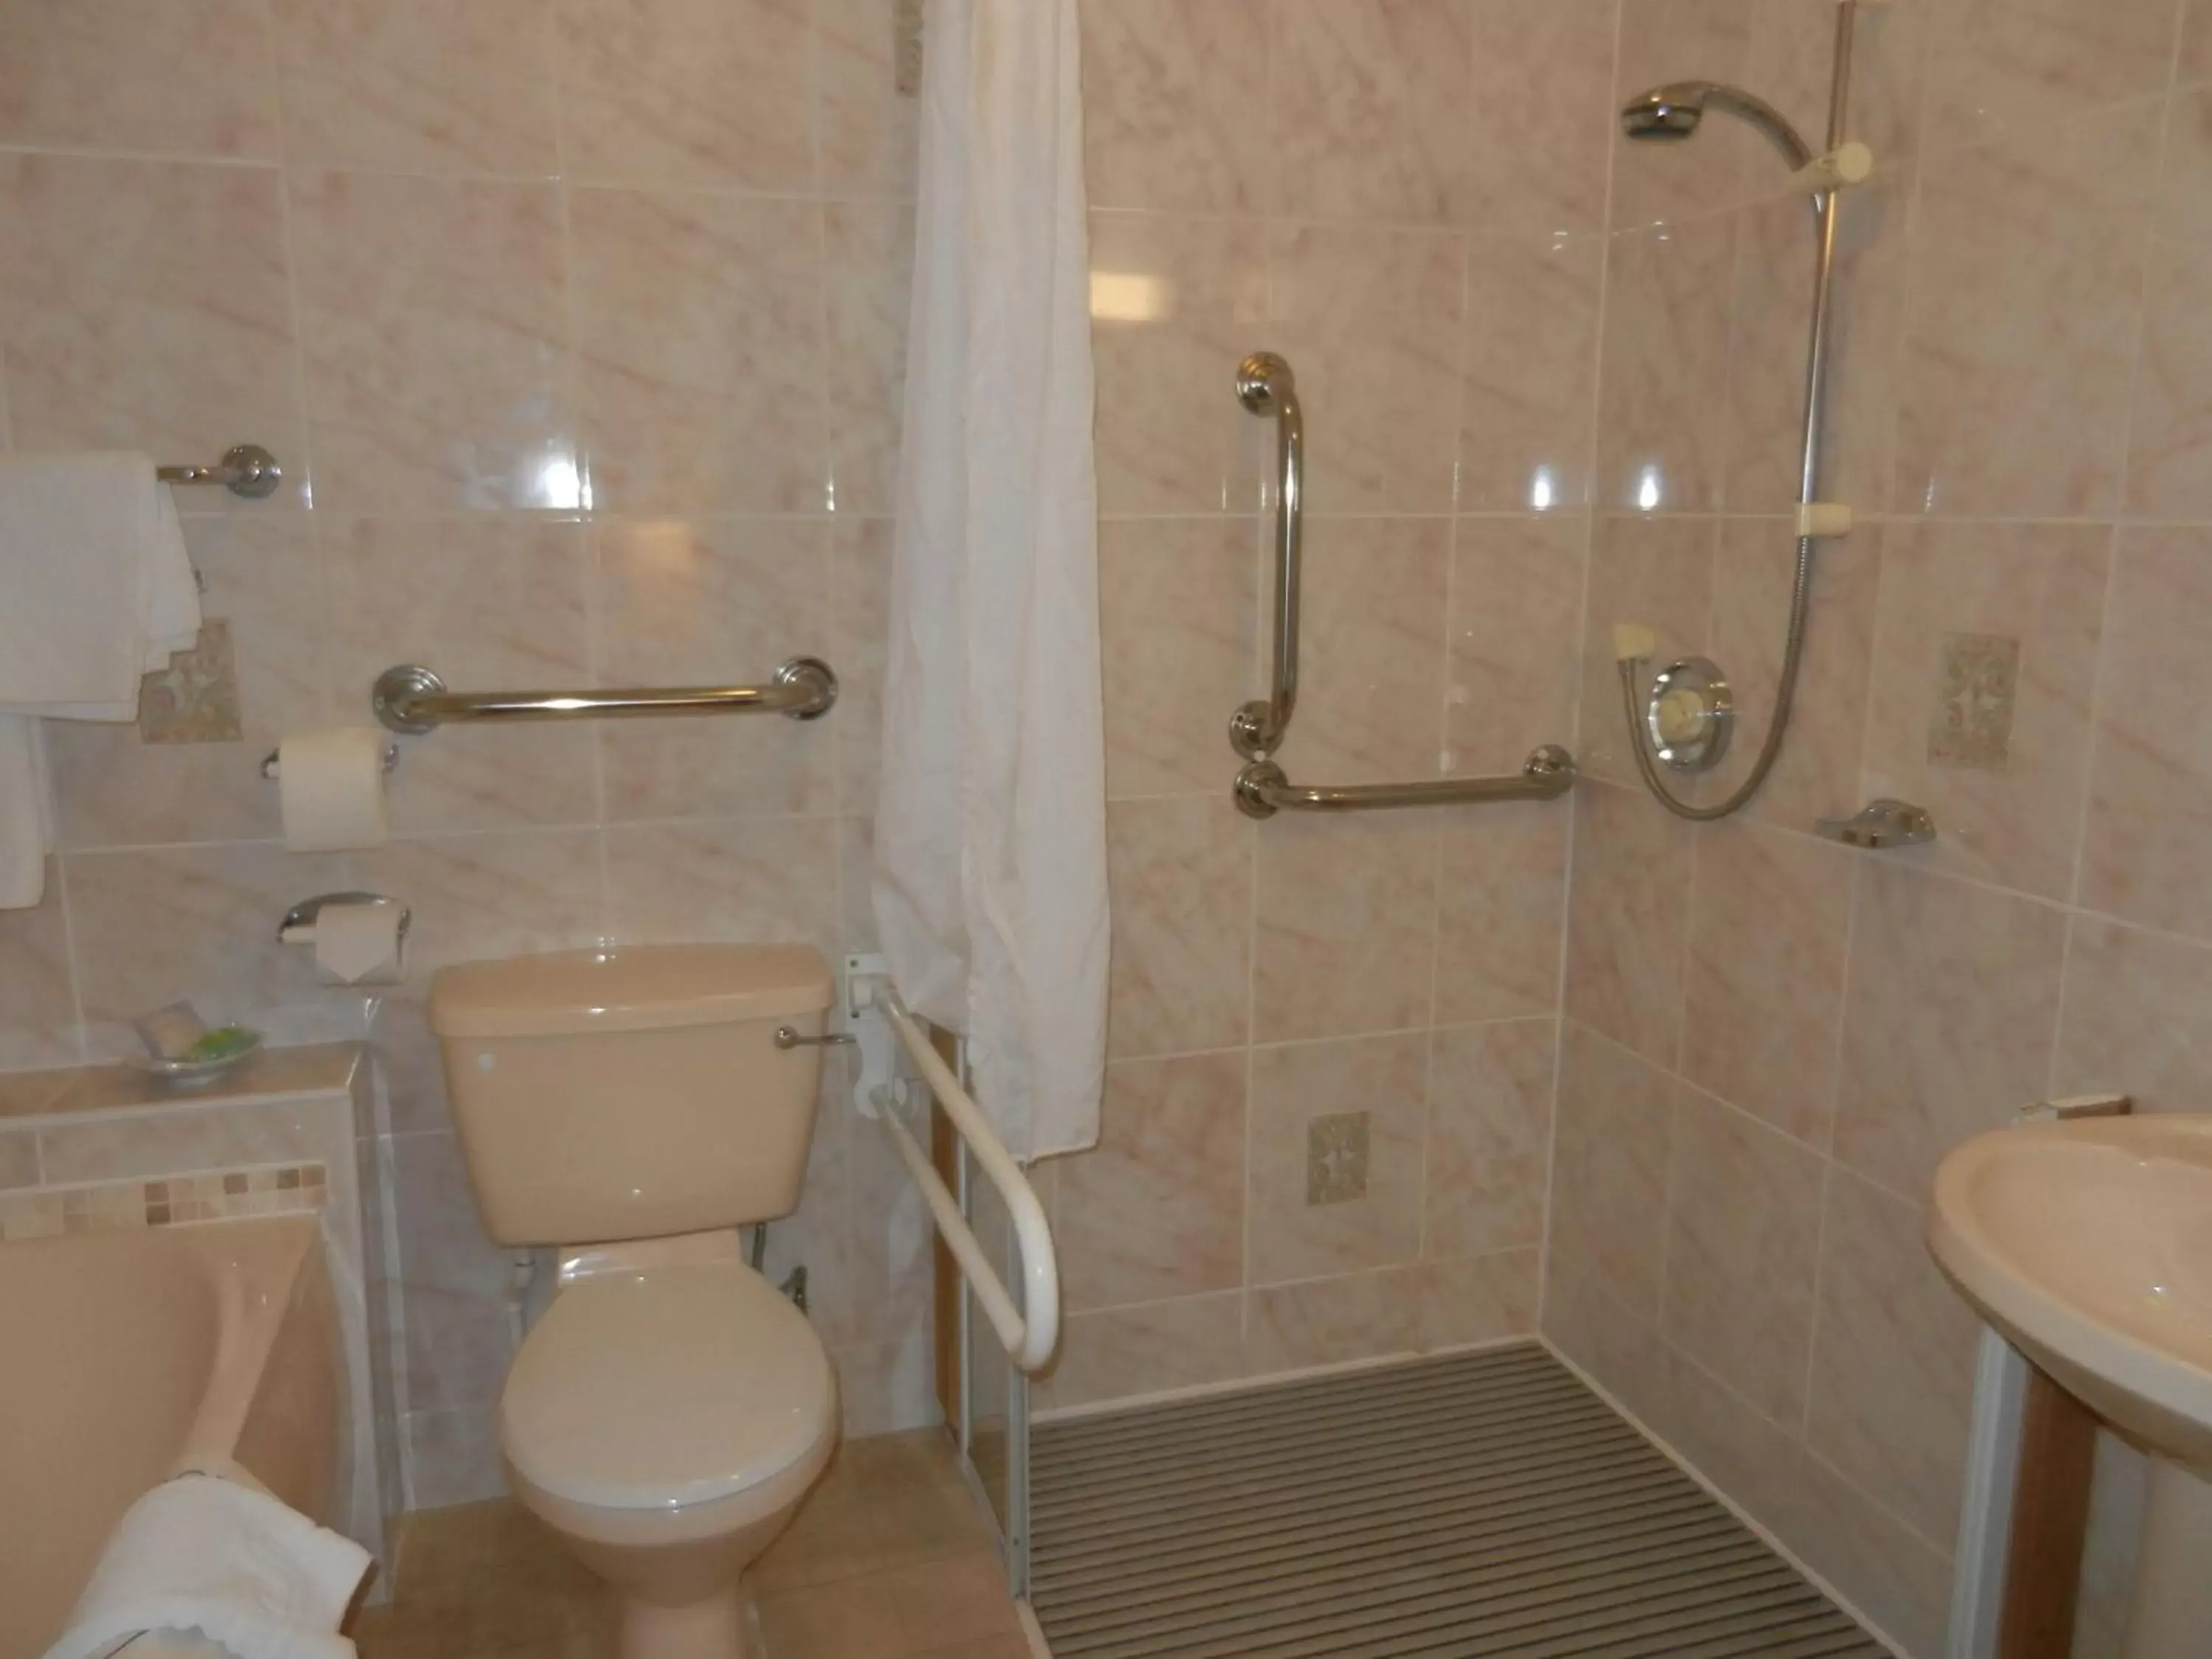 Facility for disabled guests, Bathroom in Morangie Hotel Tain